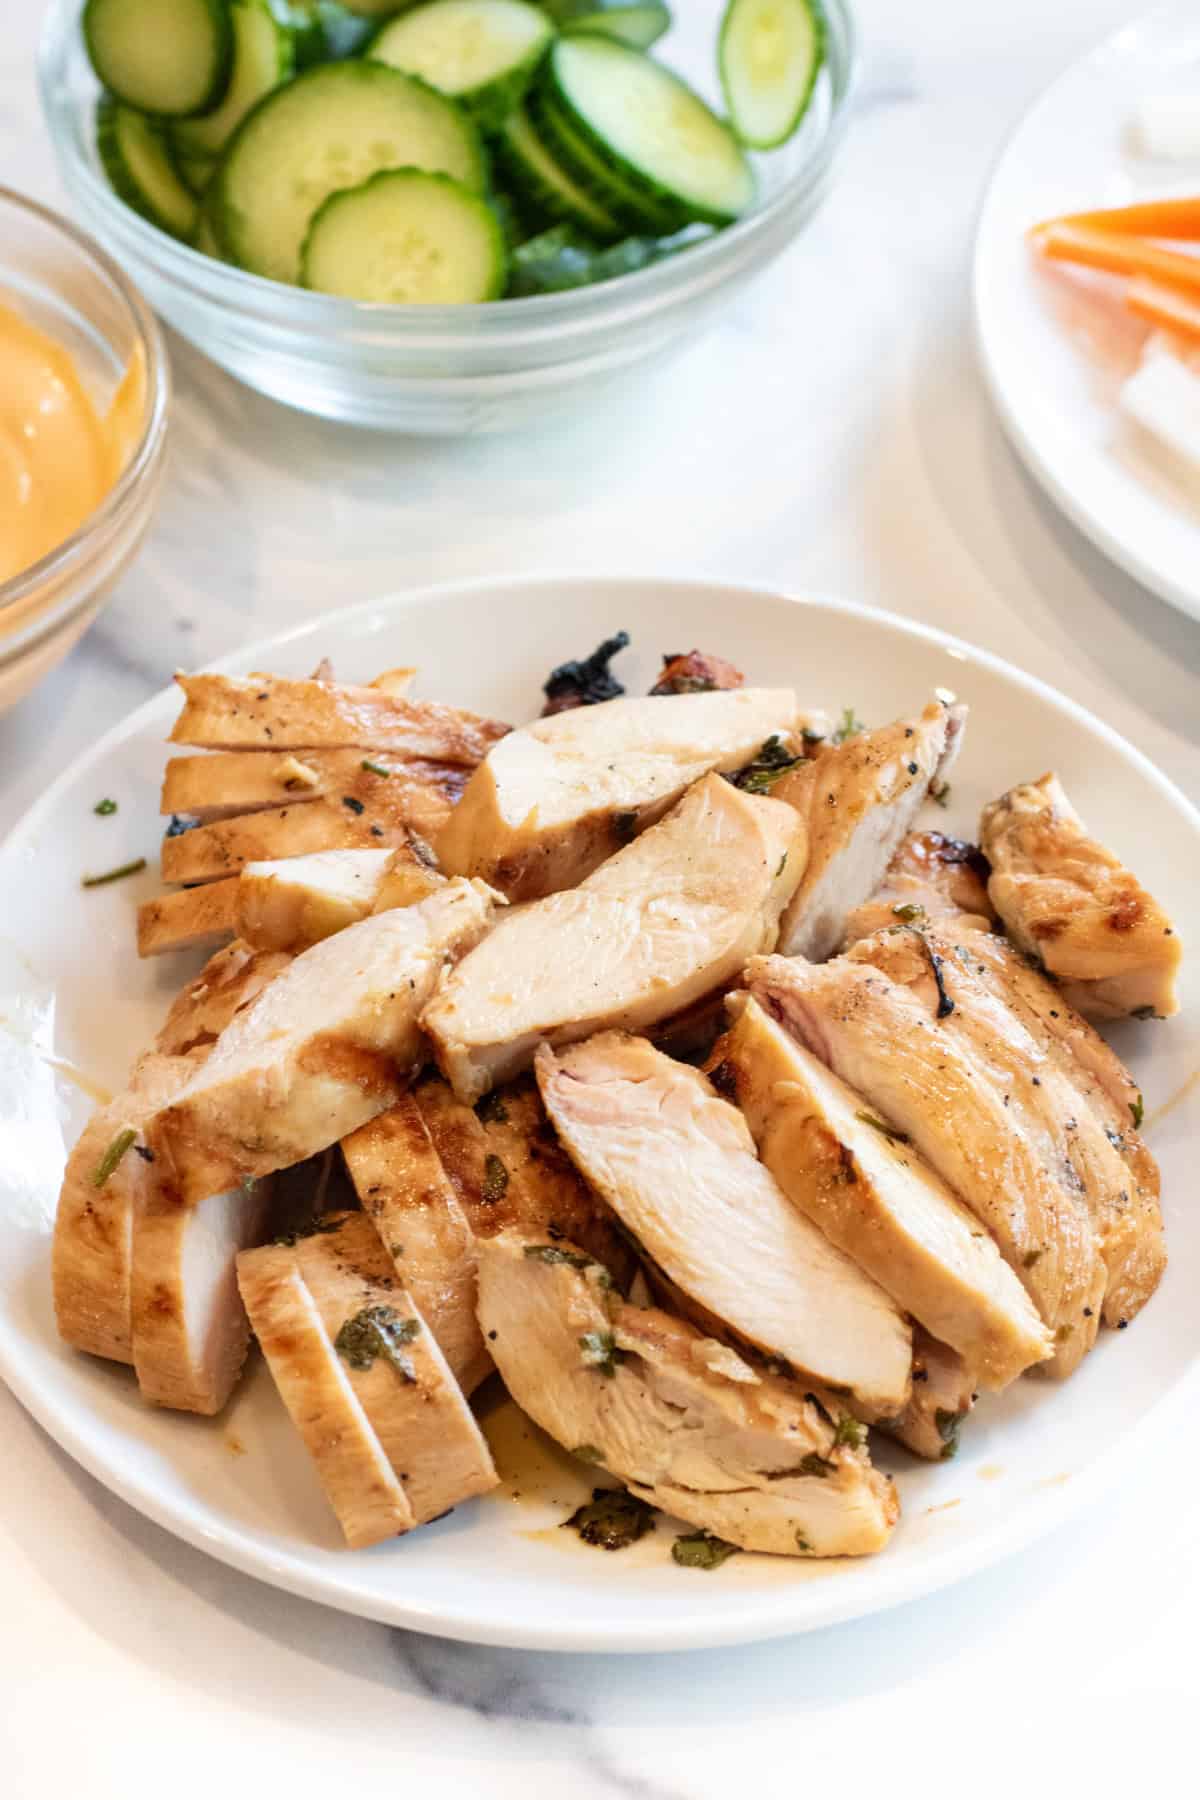 a plate of sliced grilled chicken in front of bowls of mayo, cucumber, and carrot and daikon.